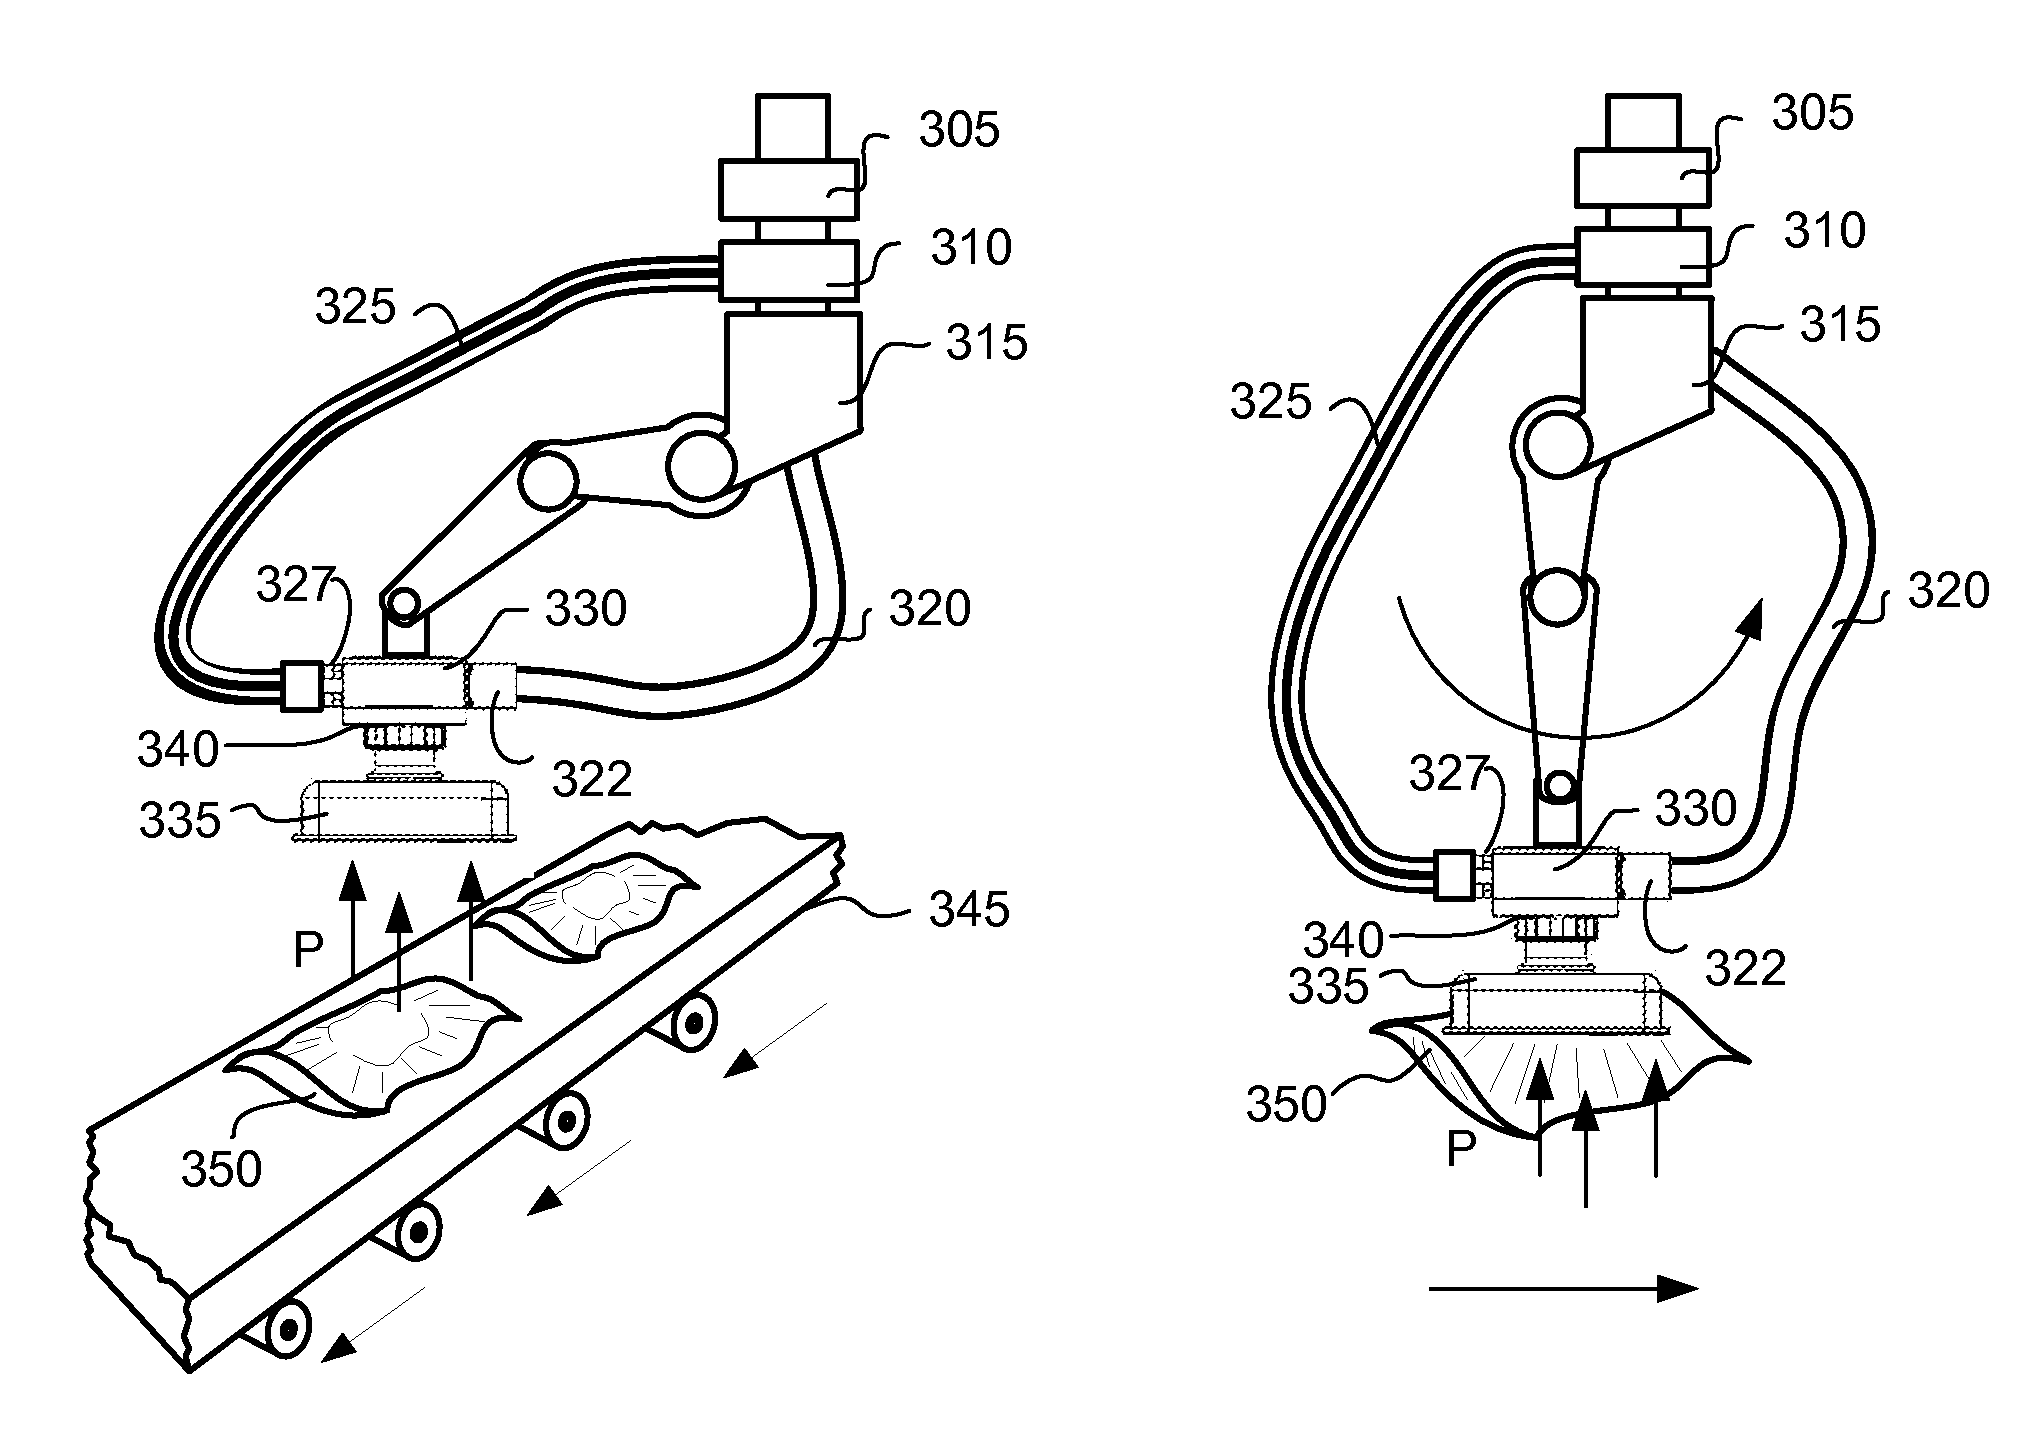 Apparatus and Method For Gripping and Releasing Objects